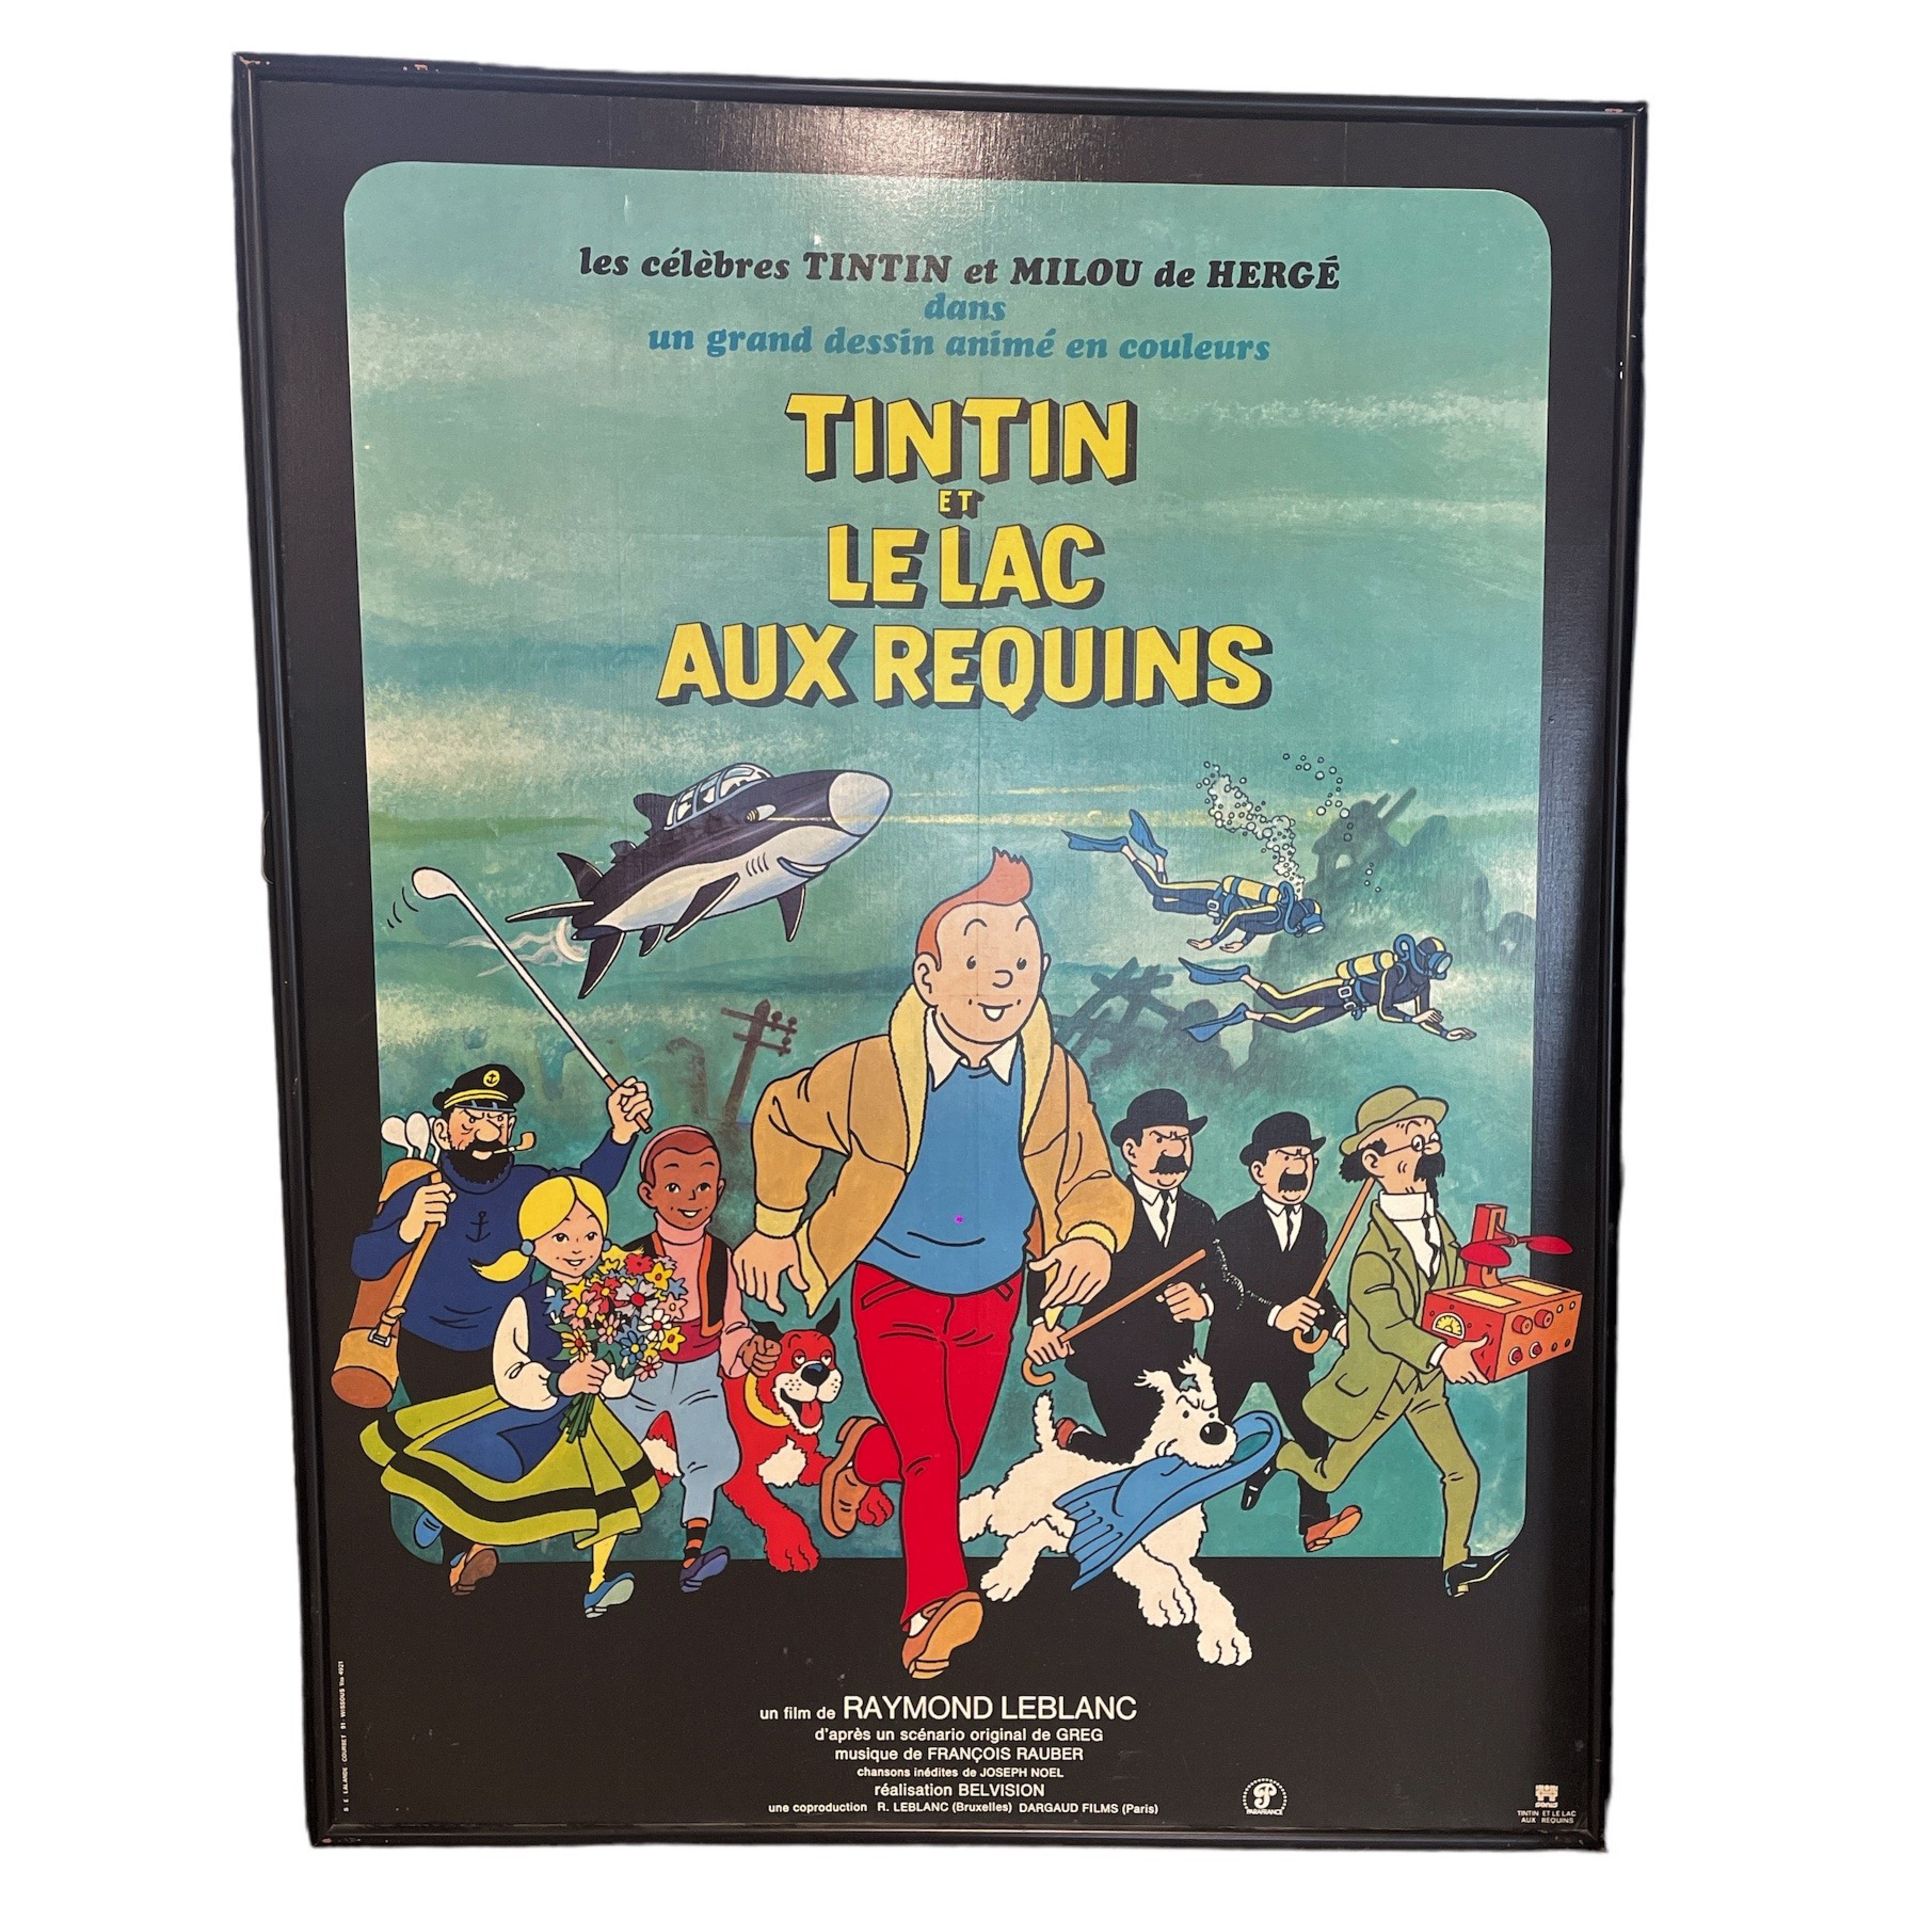 Large canvas poster for the film "Tintin le lac aux requins" (Tintin and the lake of sharks)